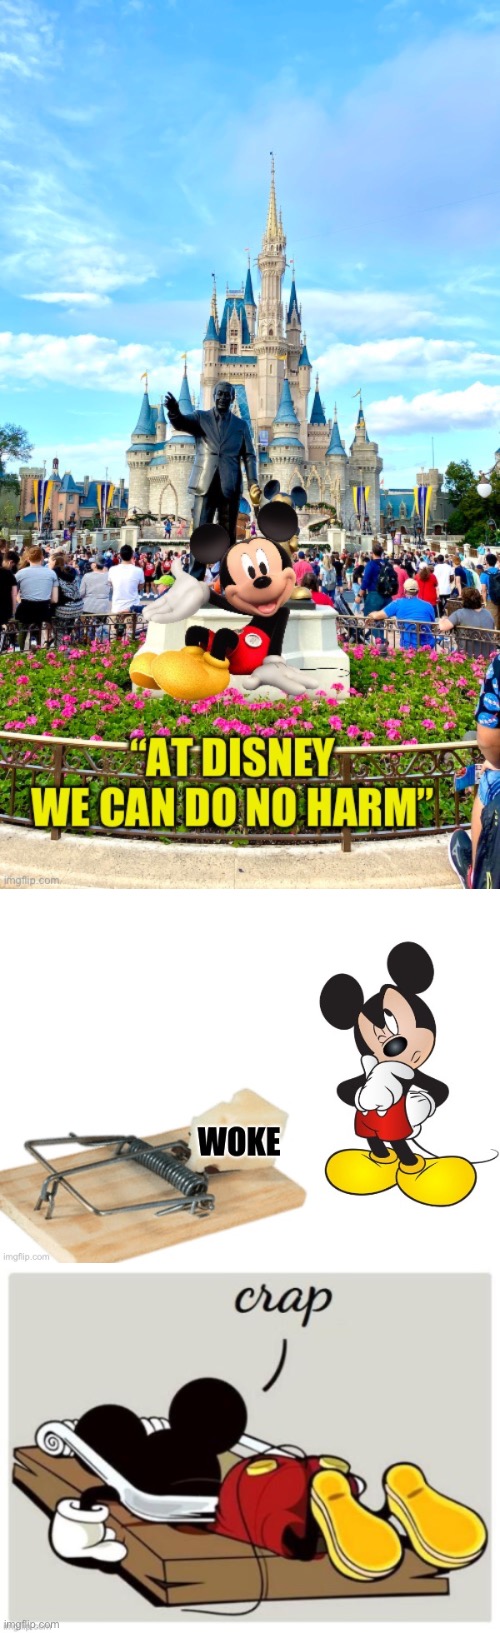 Not Your Parent’s Disney | image tagged in disney,downturn,woke,mousetrap,mickey mouse | made w/ Imgflip meme maker